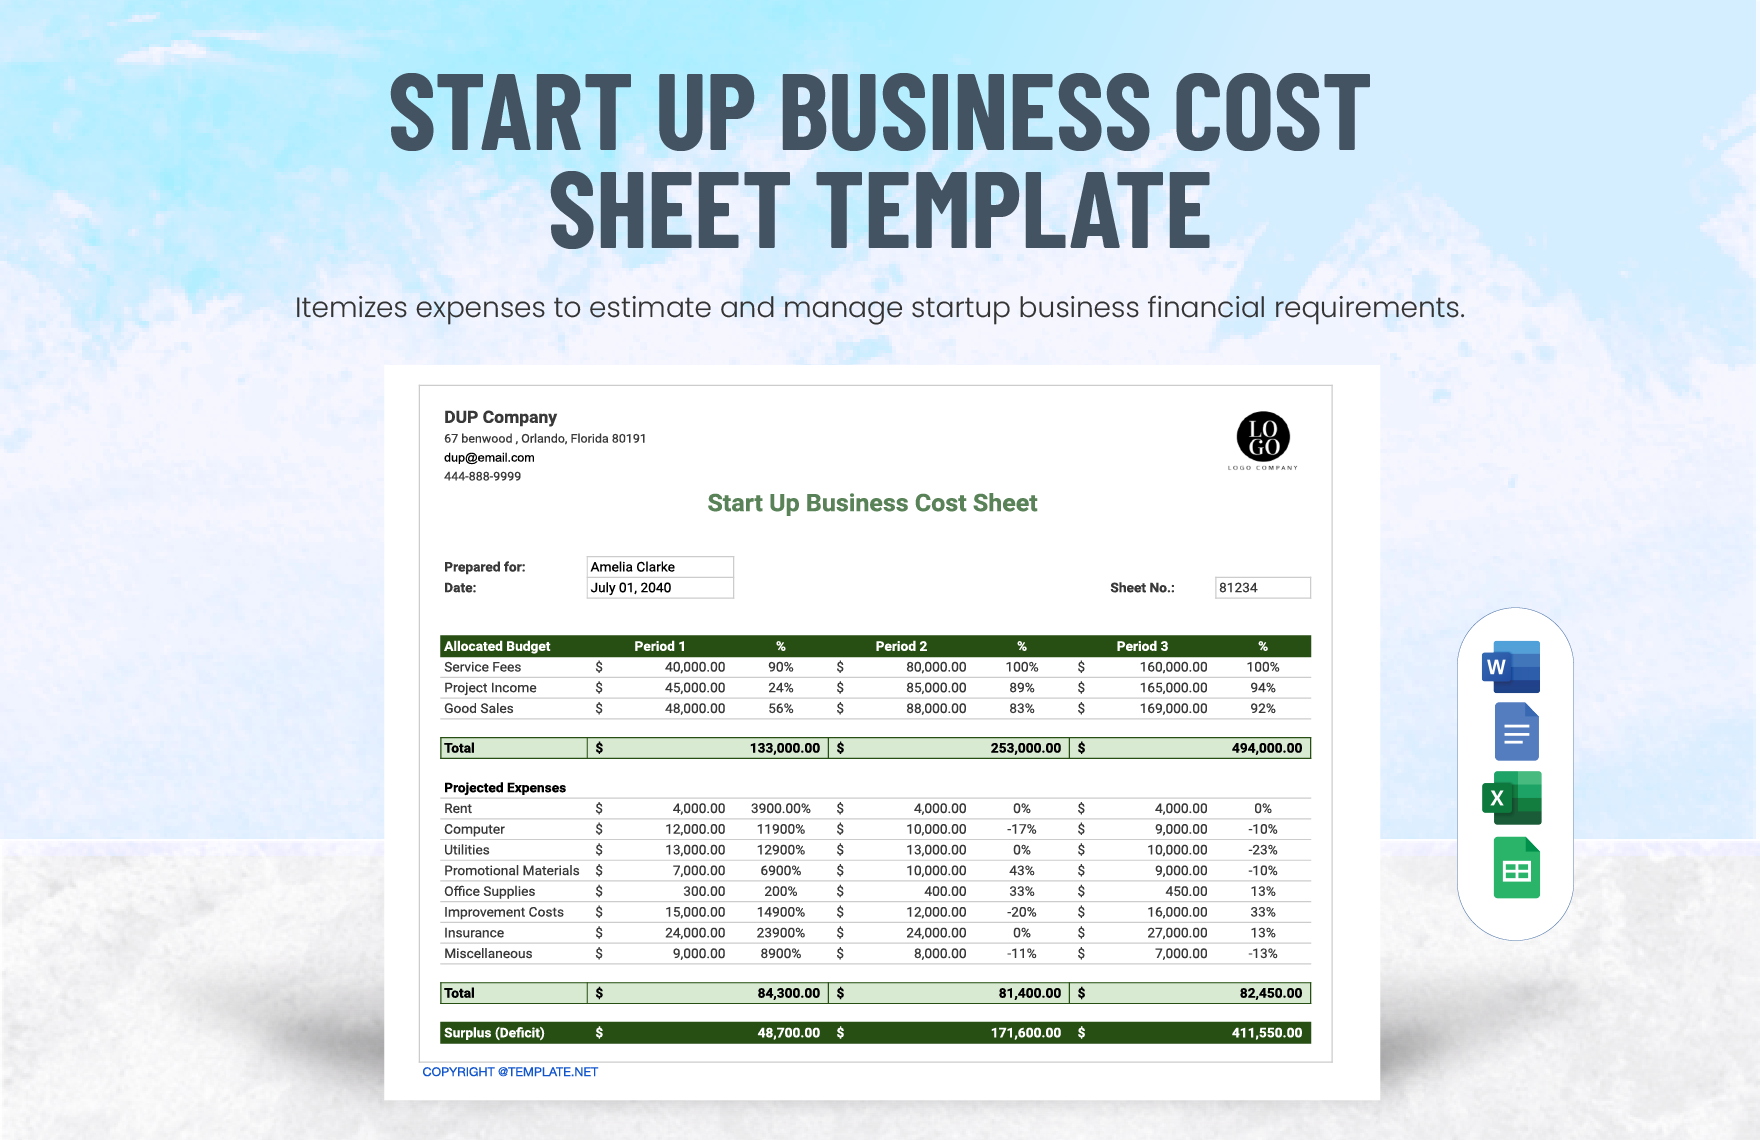 Start Up Business Cost Sheet Template in Word, Google Docs, Excel, Google Sheets